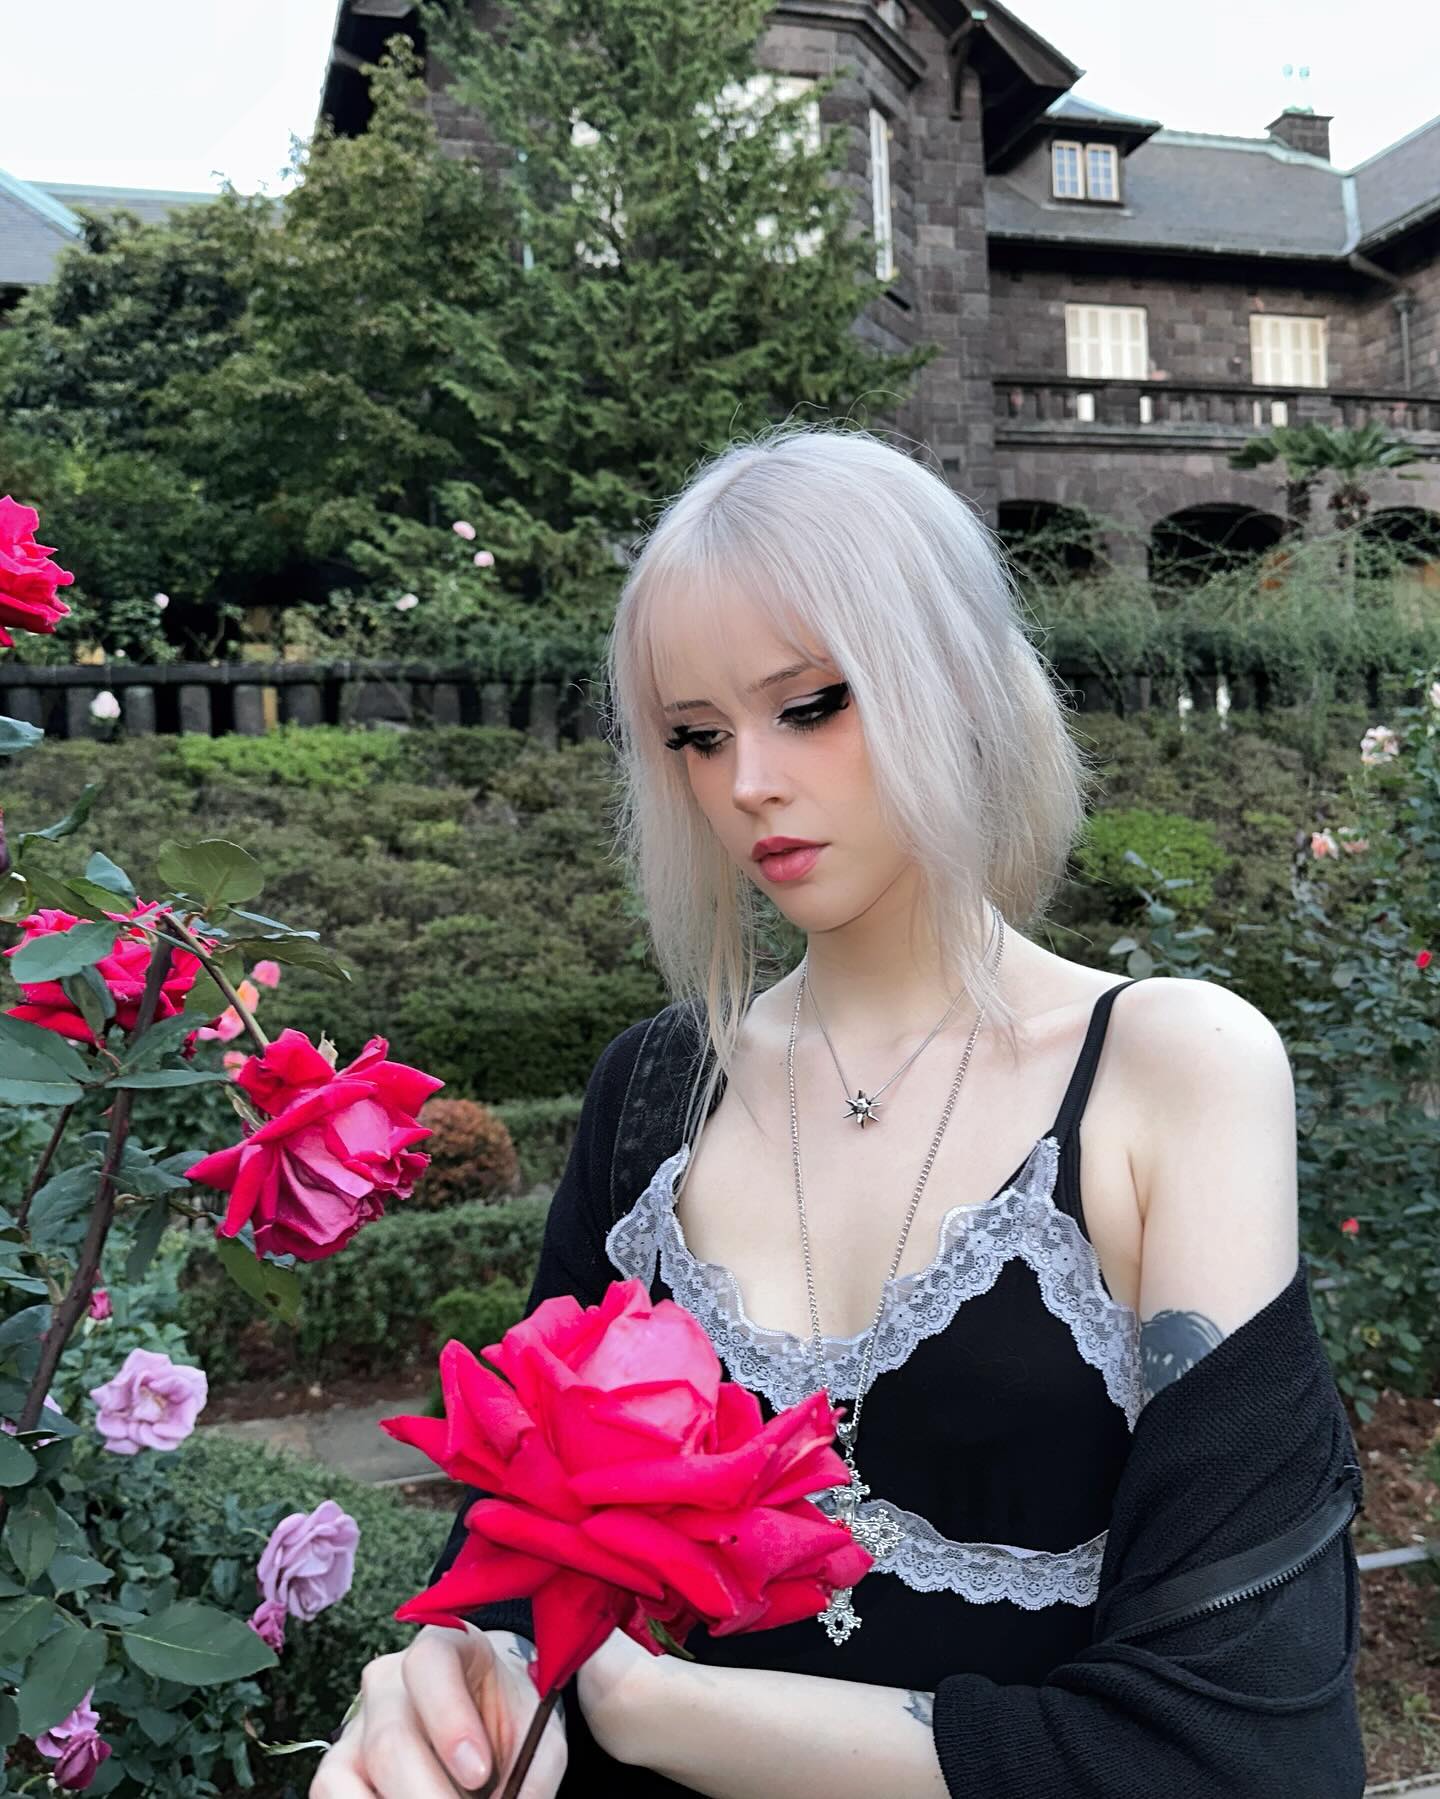 Rose festival in Tokyo with @linzor and @m.archh 🥀🖤